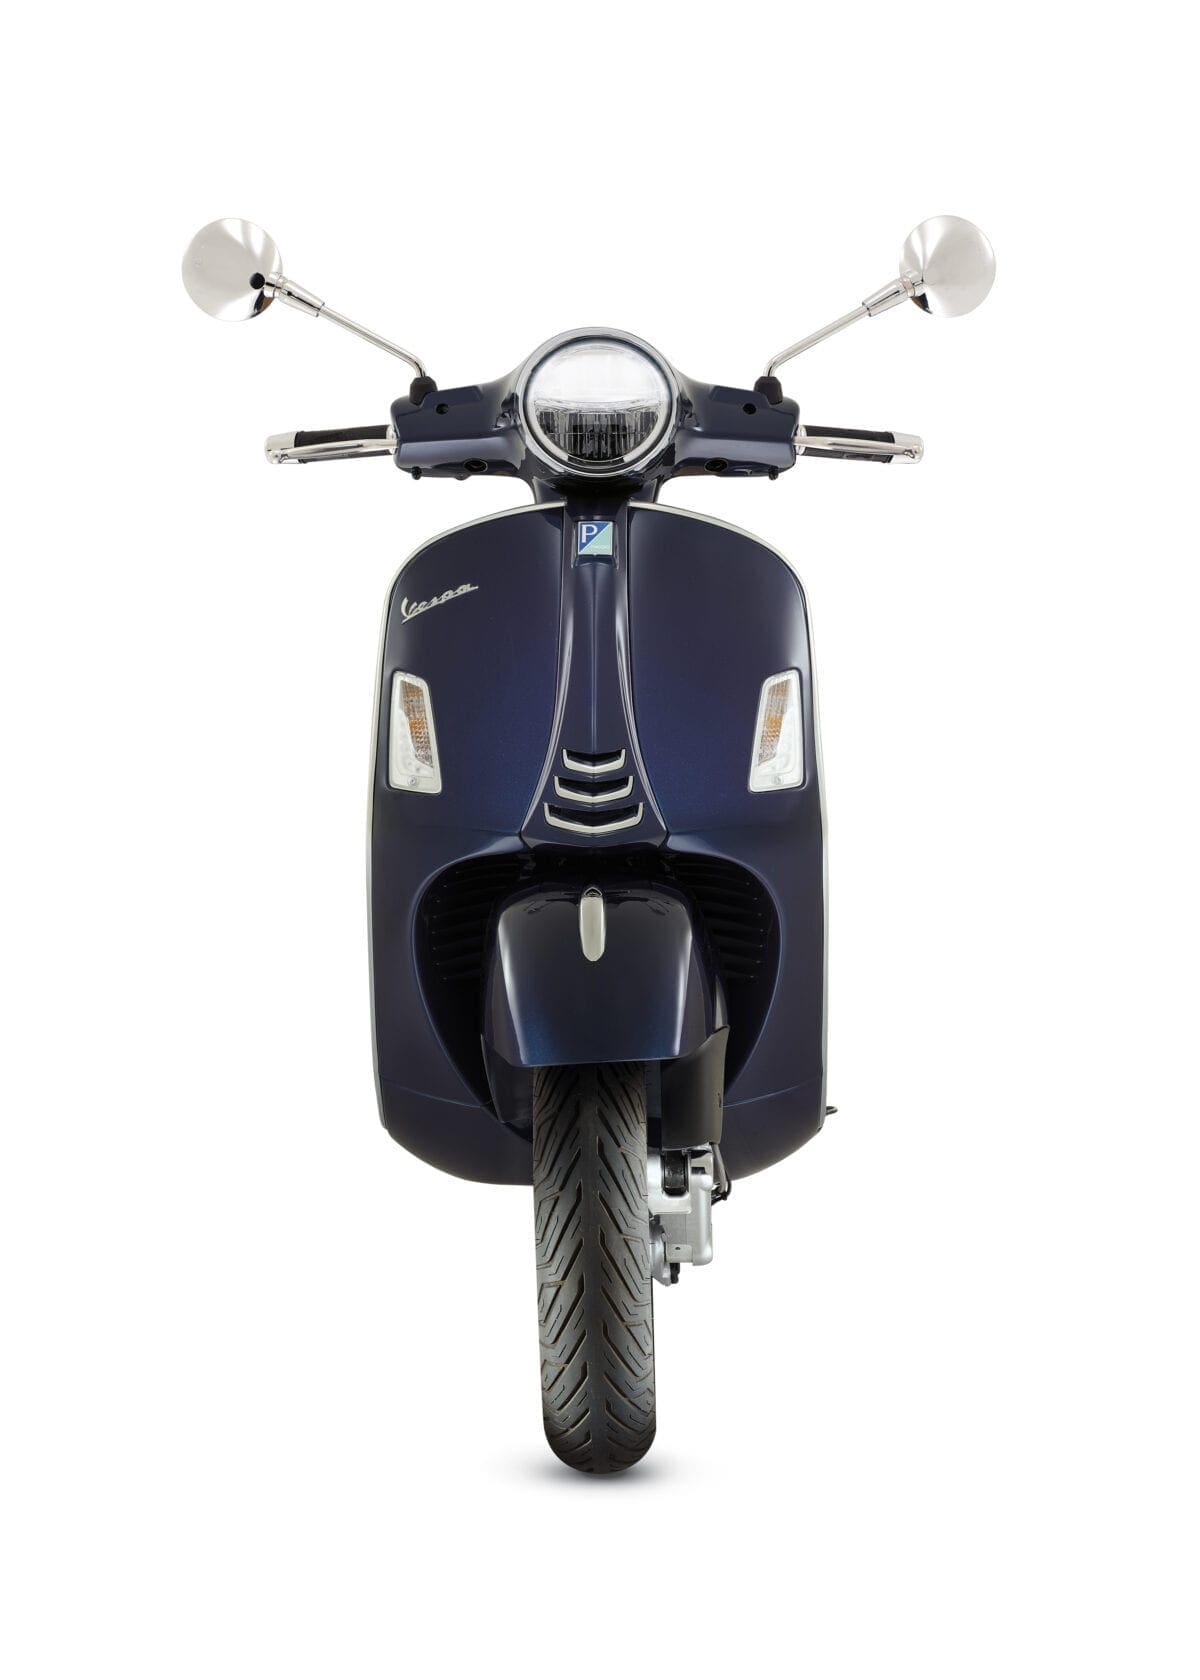 NEWS: Vespa GTS power, style and technical updates for latest models